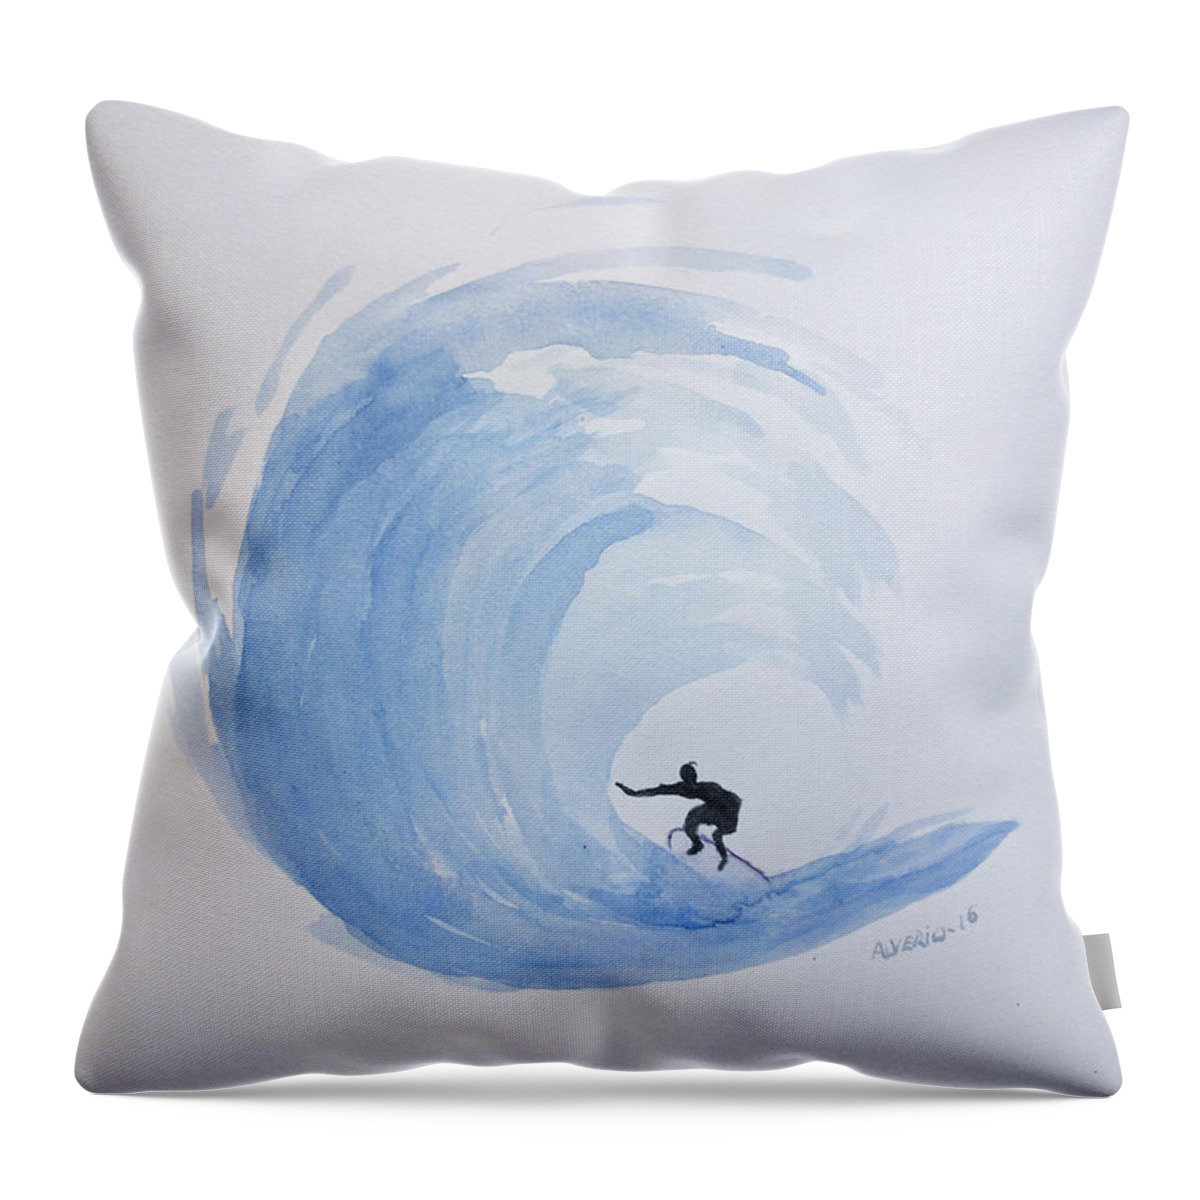 Big Throw Pillow featuring the painting Big Wave Surfing by Edwin Alverio